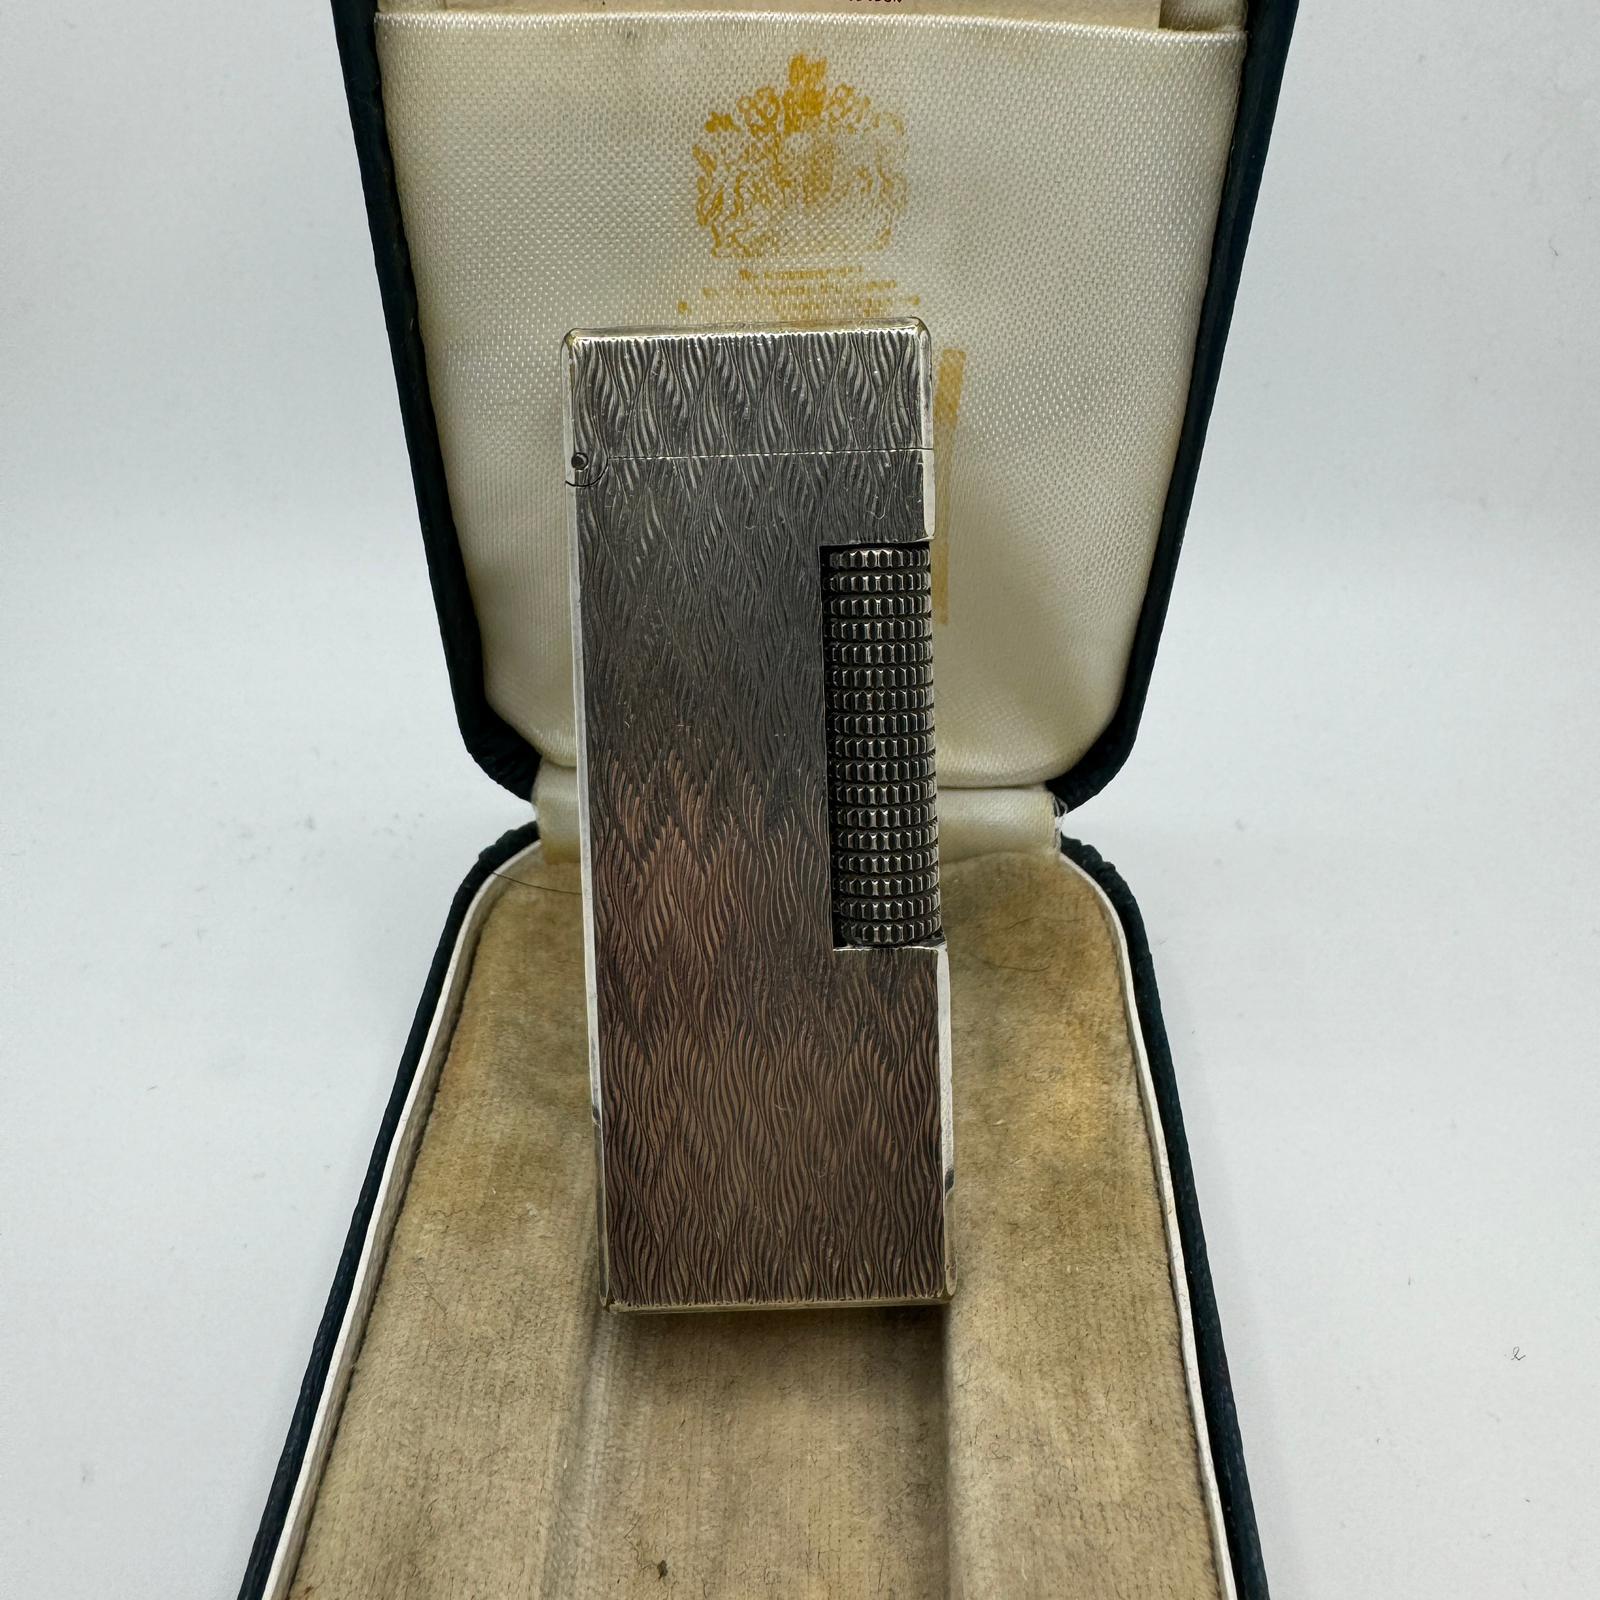 Rare Iconic Vintage and Elegant Dunhill Silver Plated 
Circa 1970s
Swiss Made Lighter
The James Bond lighter of choice 
Art Deco 
In mint condition.
Works perfectly. 
Iconic and beautifully engineered piece in rare condition.
In original BRITISH